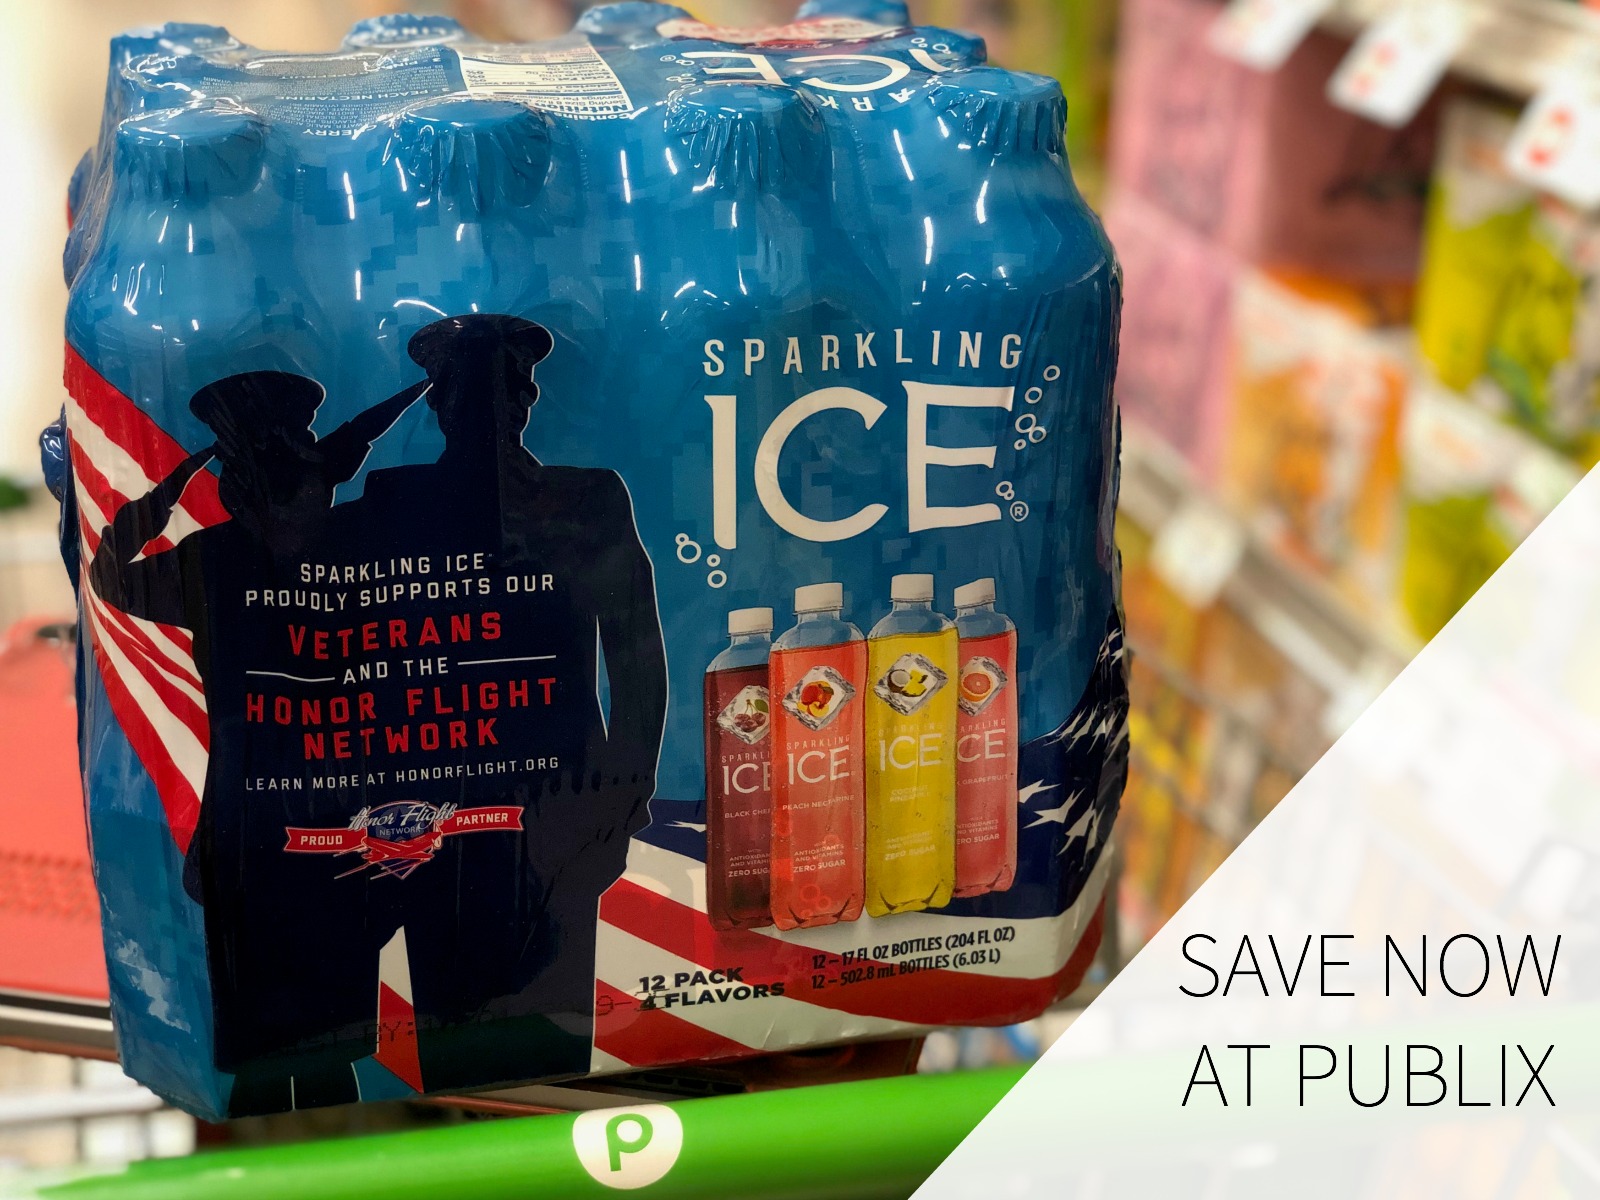 New Sparkling Ice Coupon For The Publix Sale – Look For Limited Edition Red, White and Blue Packages